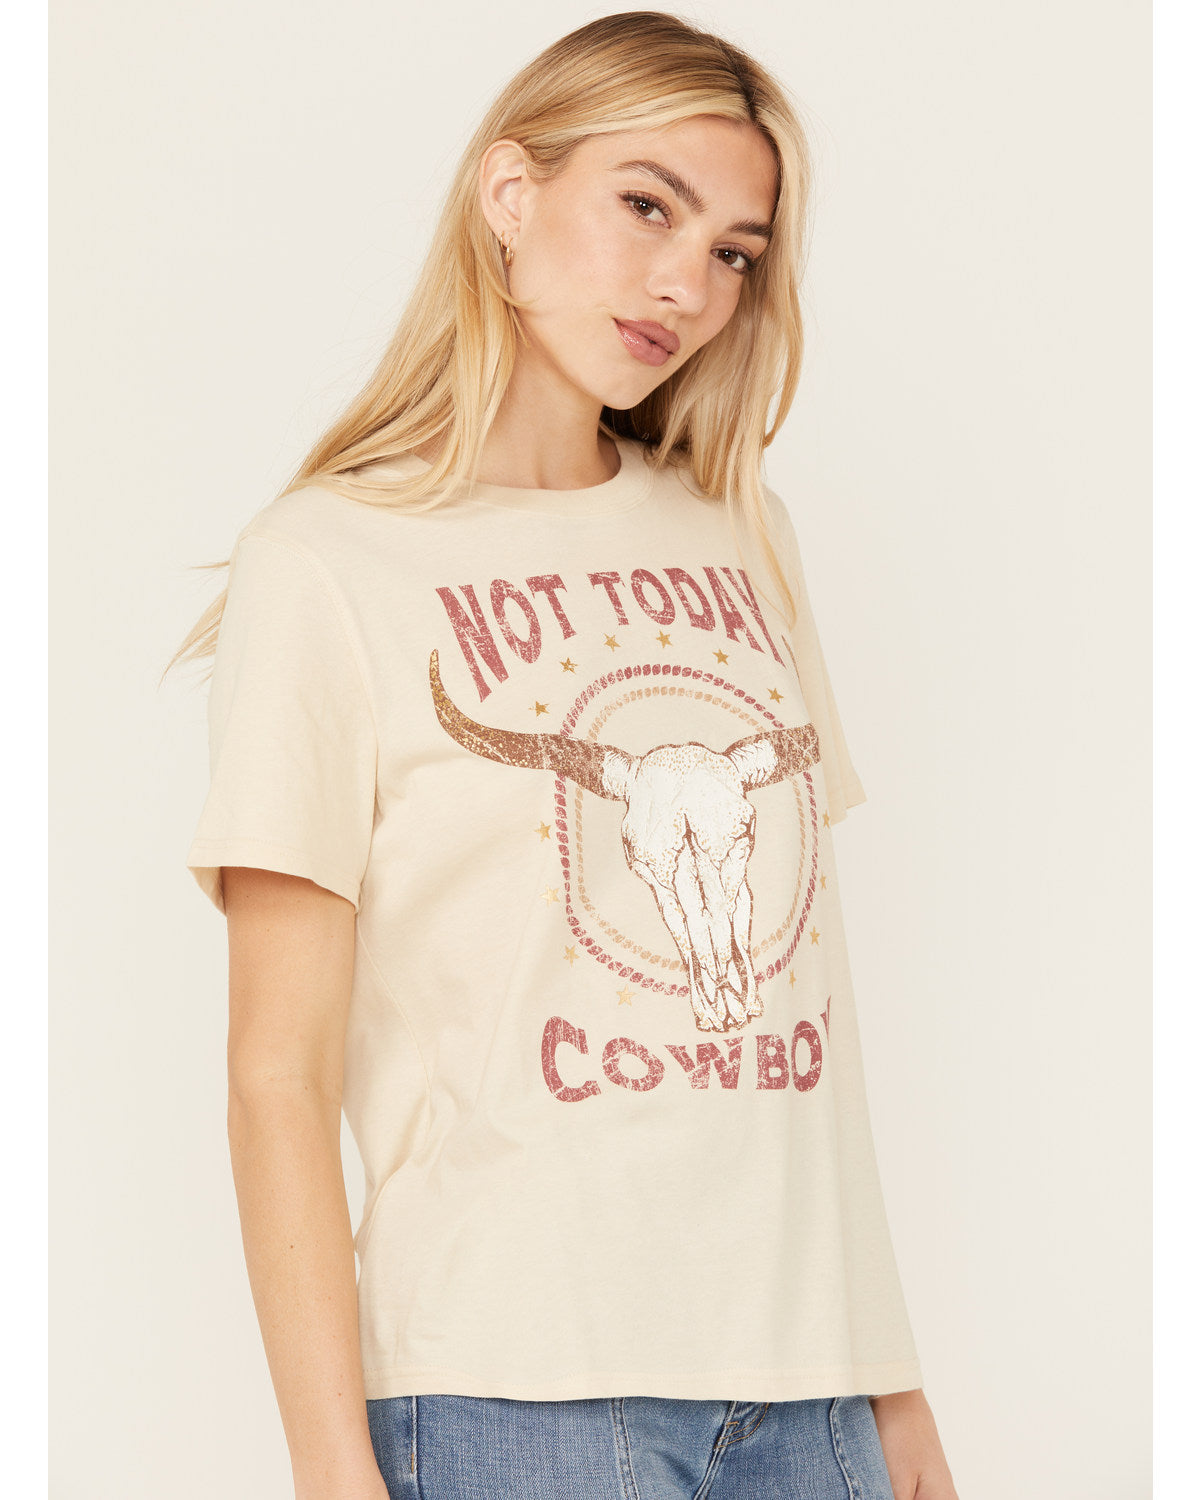 Not Today Cowboy Boyfriend Fit Short Sleeve Graphic Tee